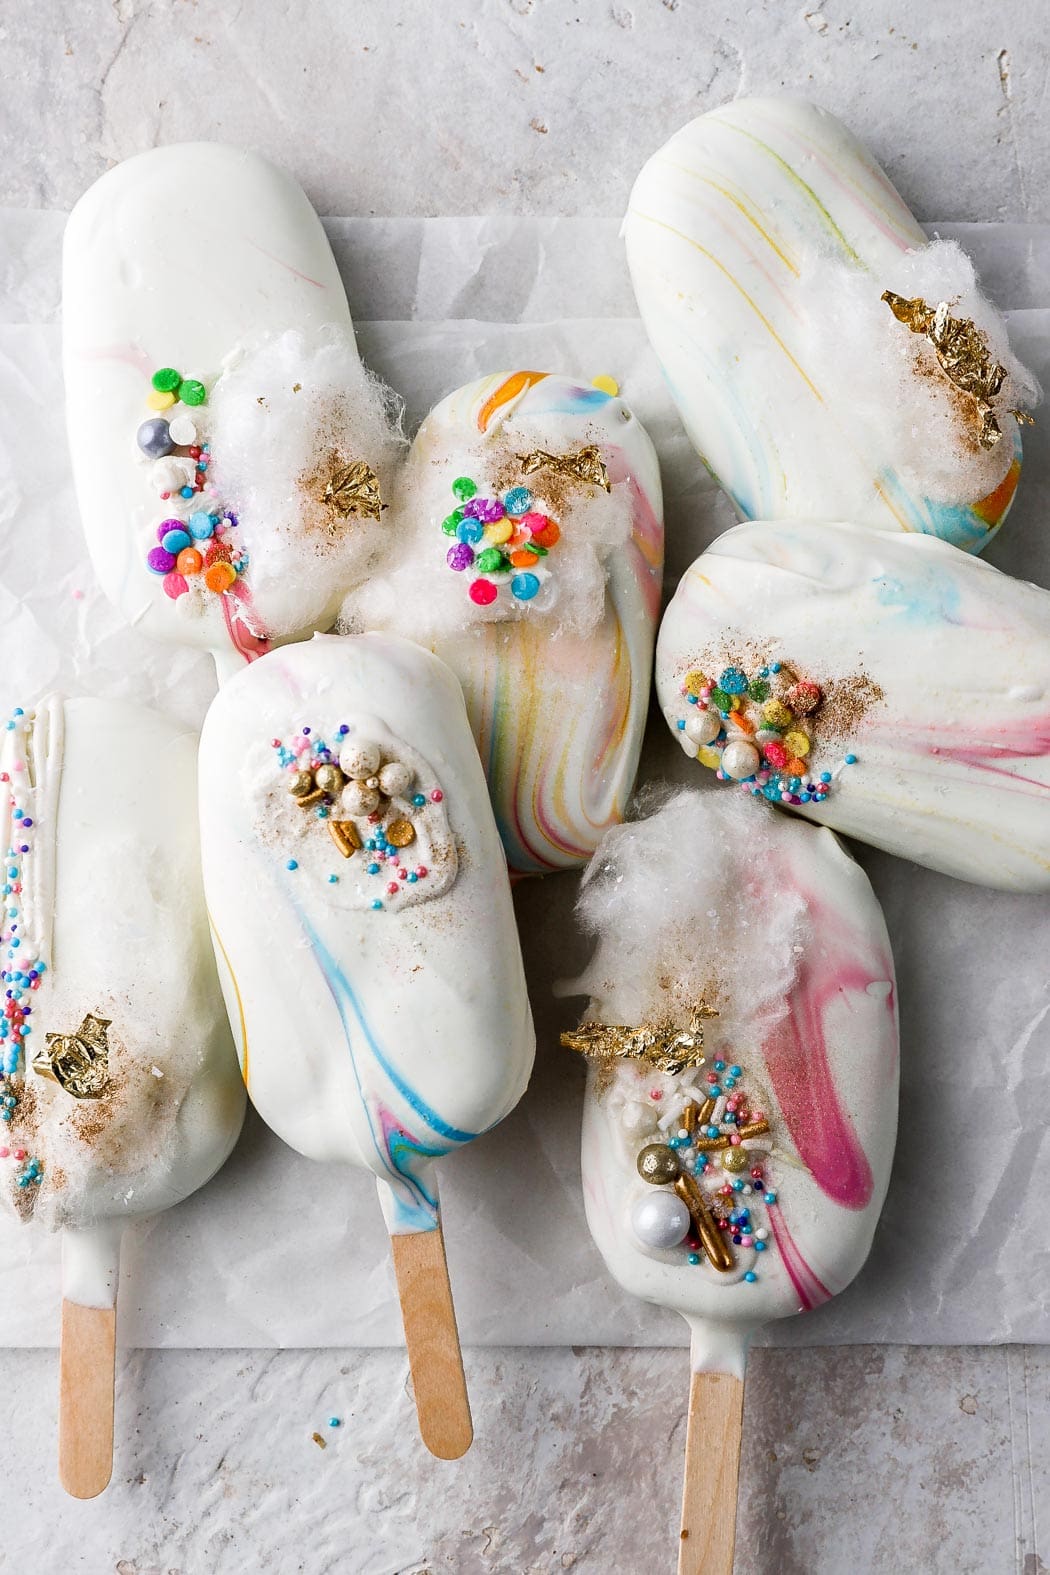 7 cakesicles with sprinkles